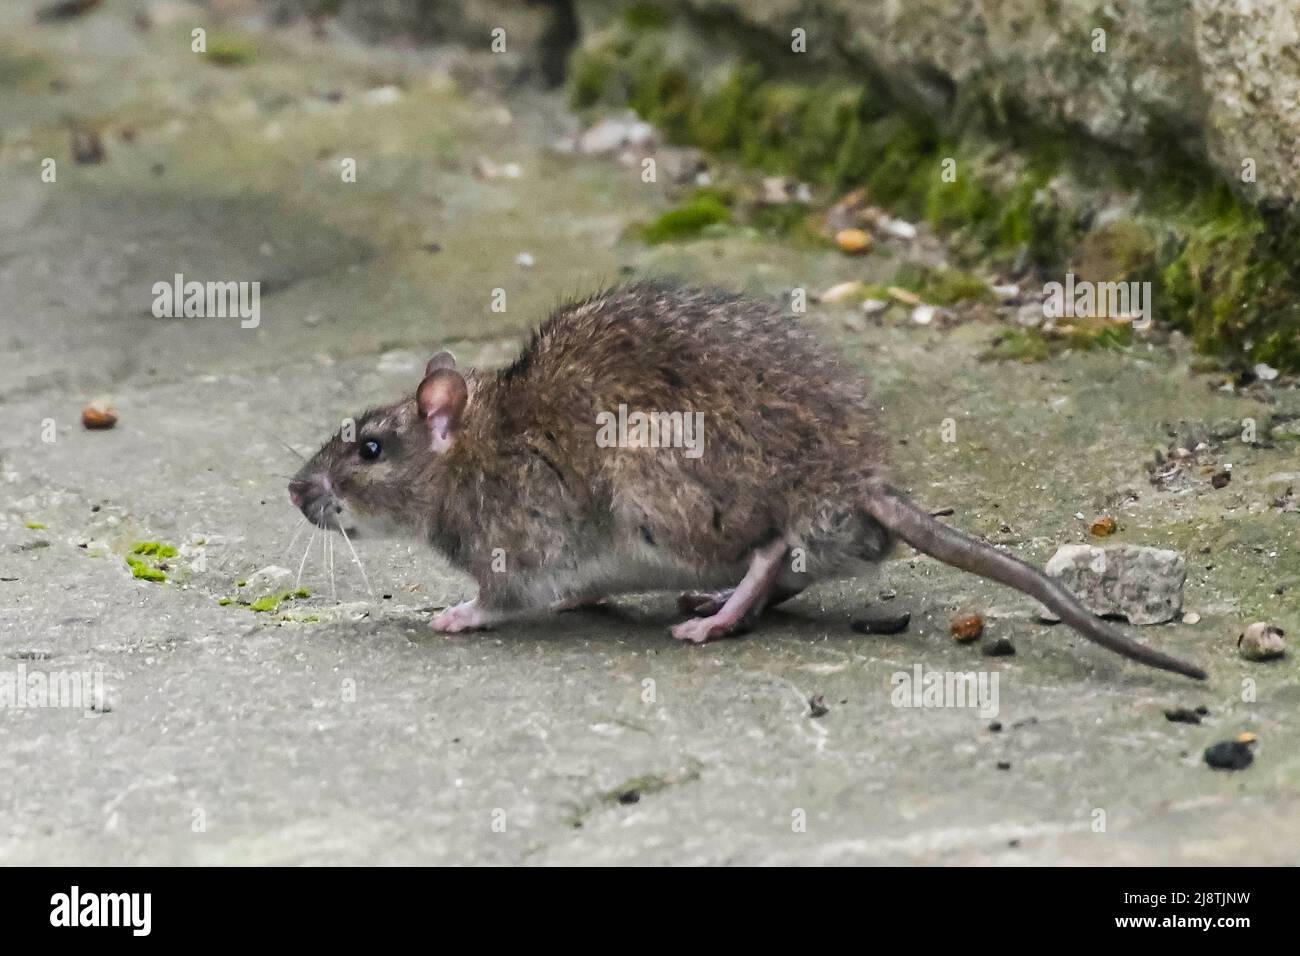 A Brown Rat - Rattus norvegicus on a patio looking for food dropped from a bird feeder.  Picture Credit: Graham Hunt/Alamy Stock Photo